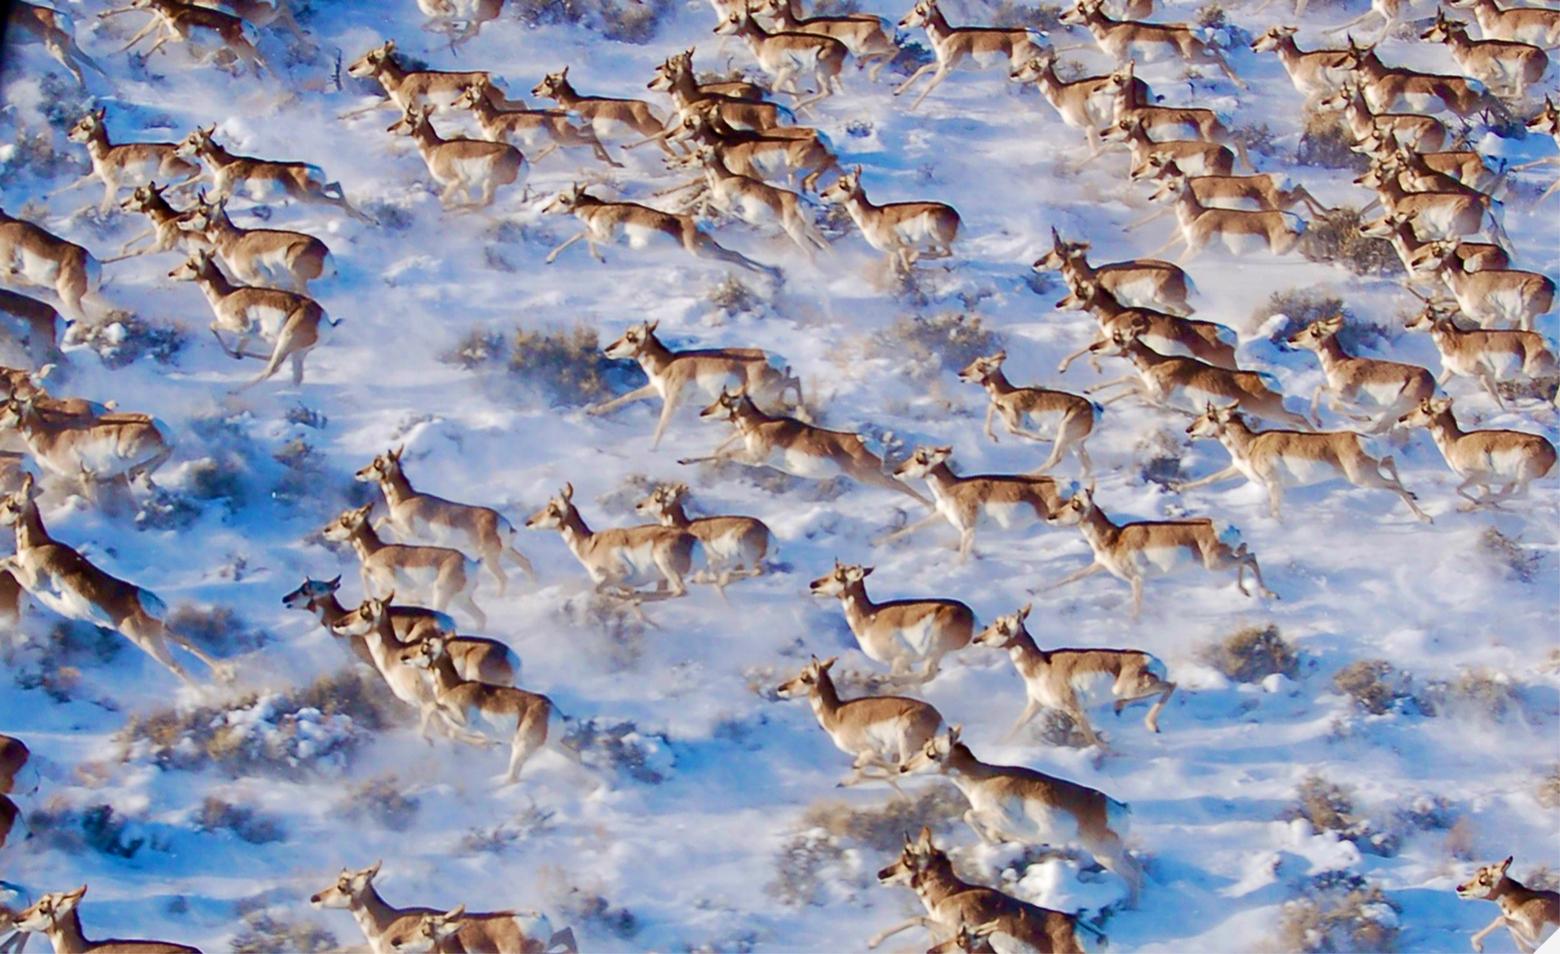 Pronghorn migration in the Greater Yellowstone migration, among the many species in the ecosystem that can still move unfettered across the landscape. Photo courtesy Joel Berger